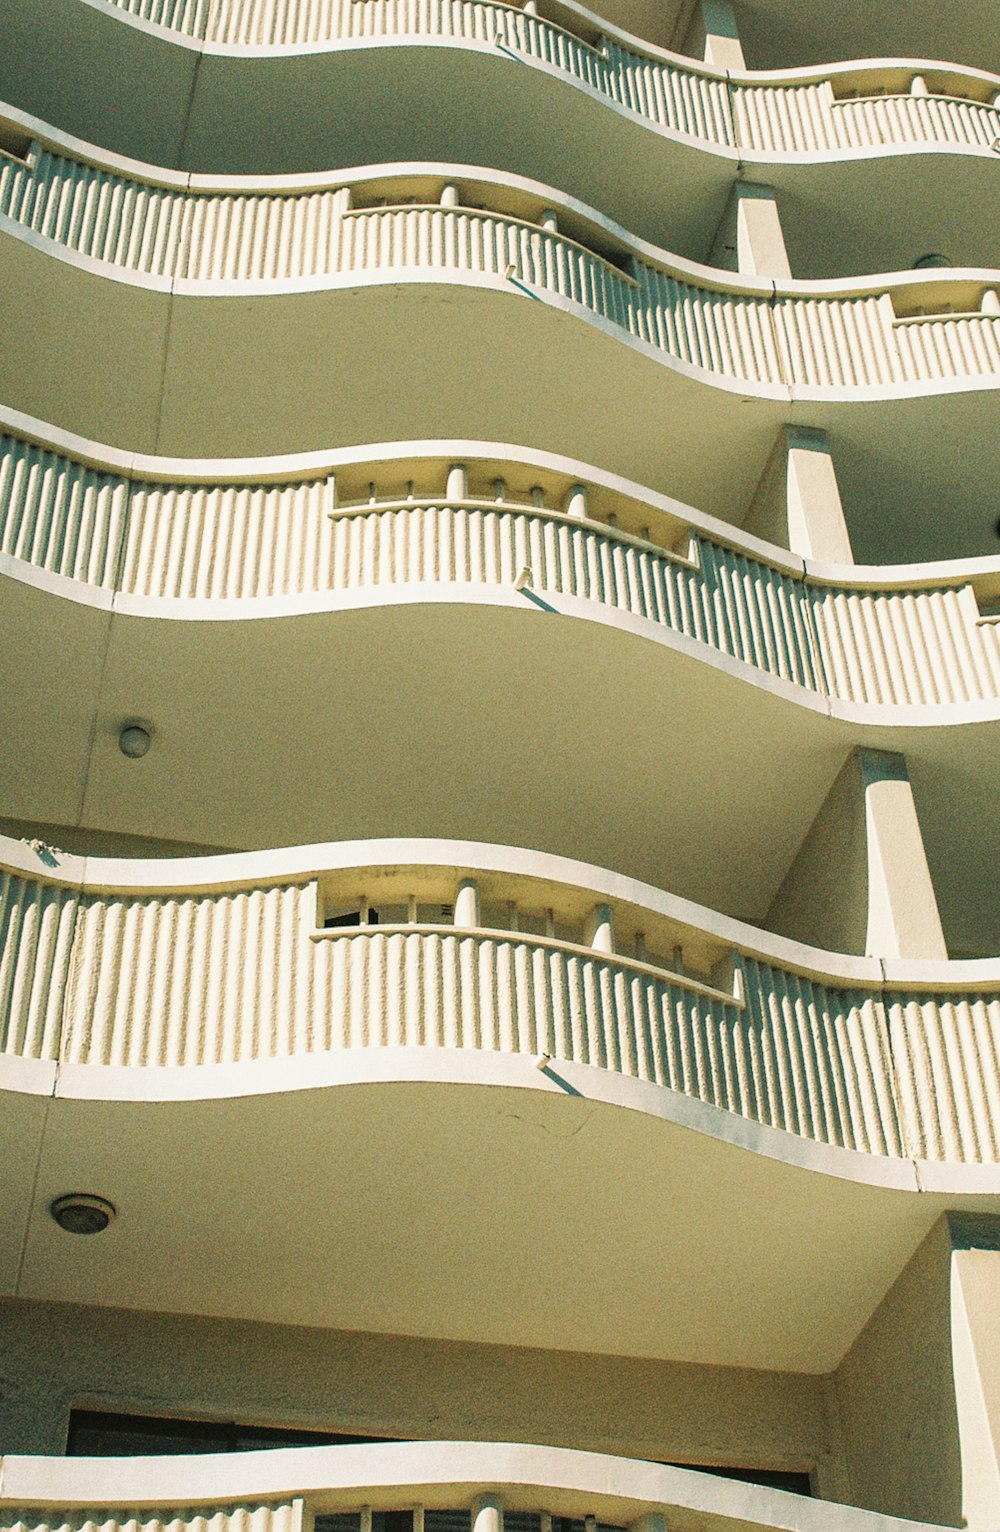 a close up of a building with balconies